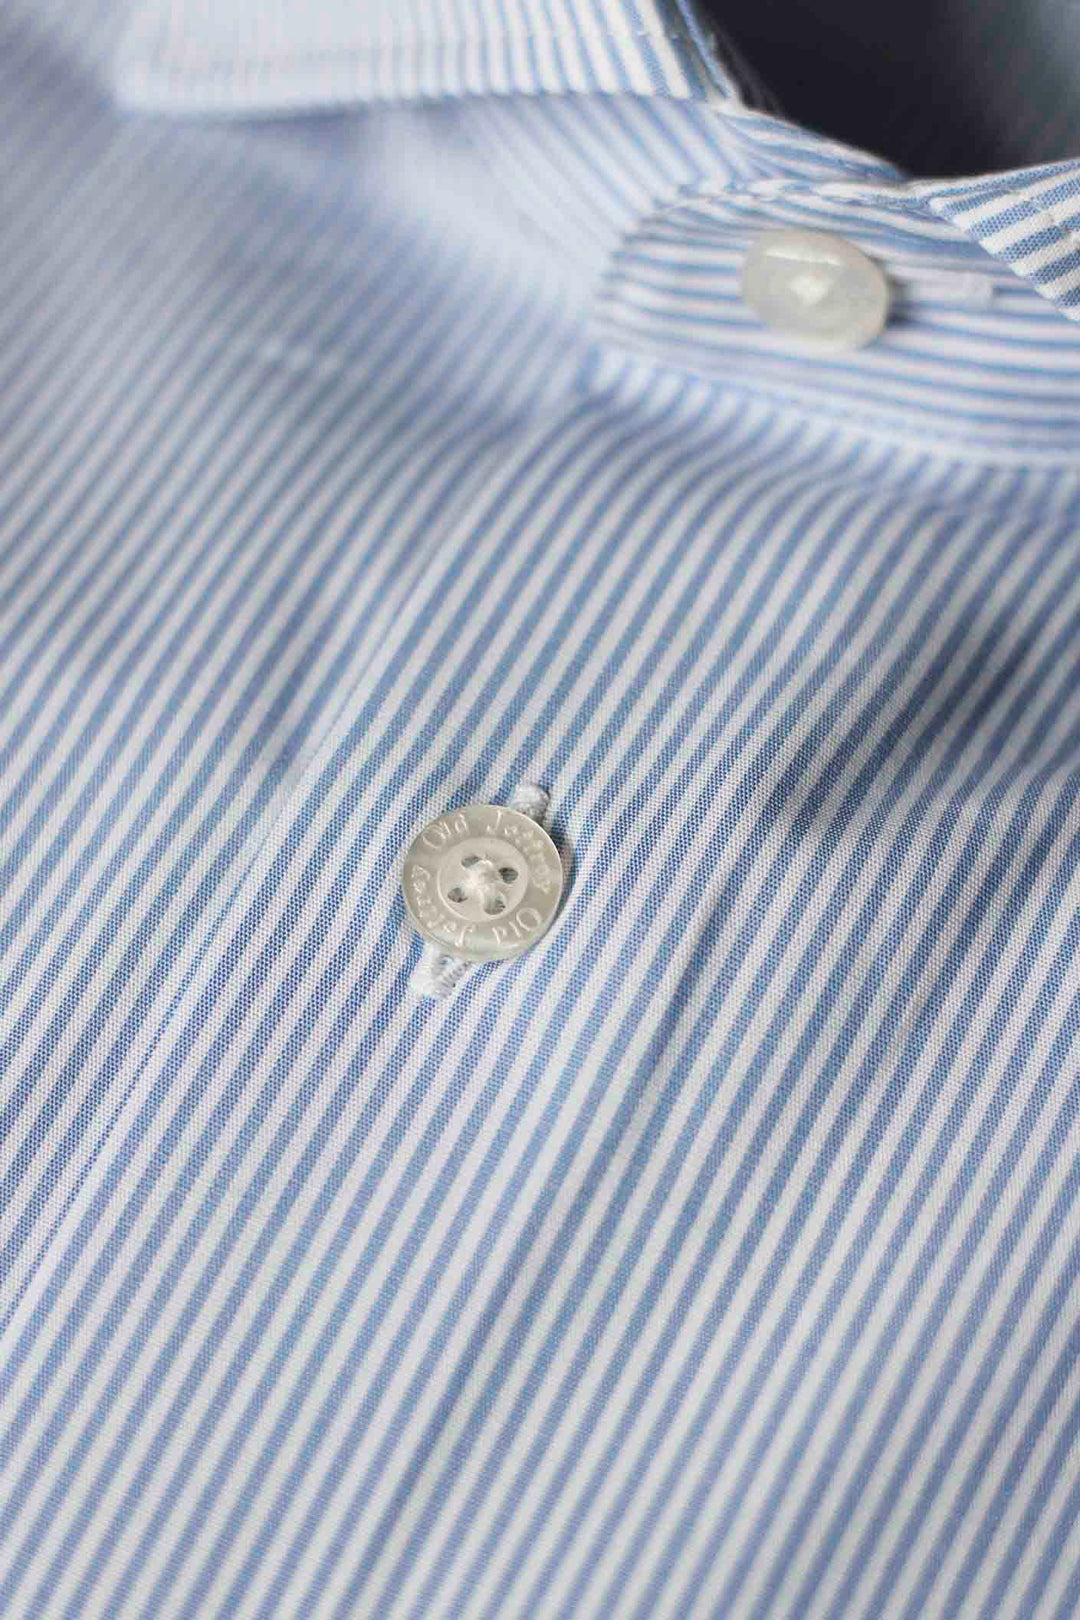 White and Light Blue Striped Dress Shirt WITHOUT Cufflinks